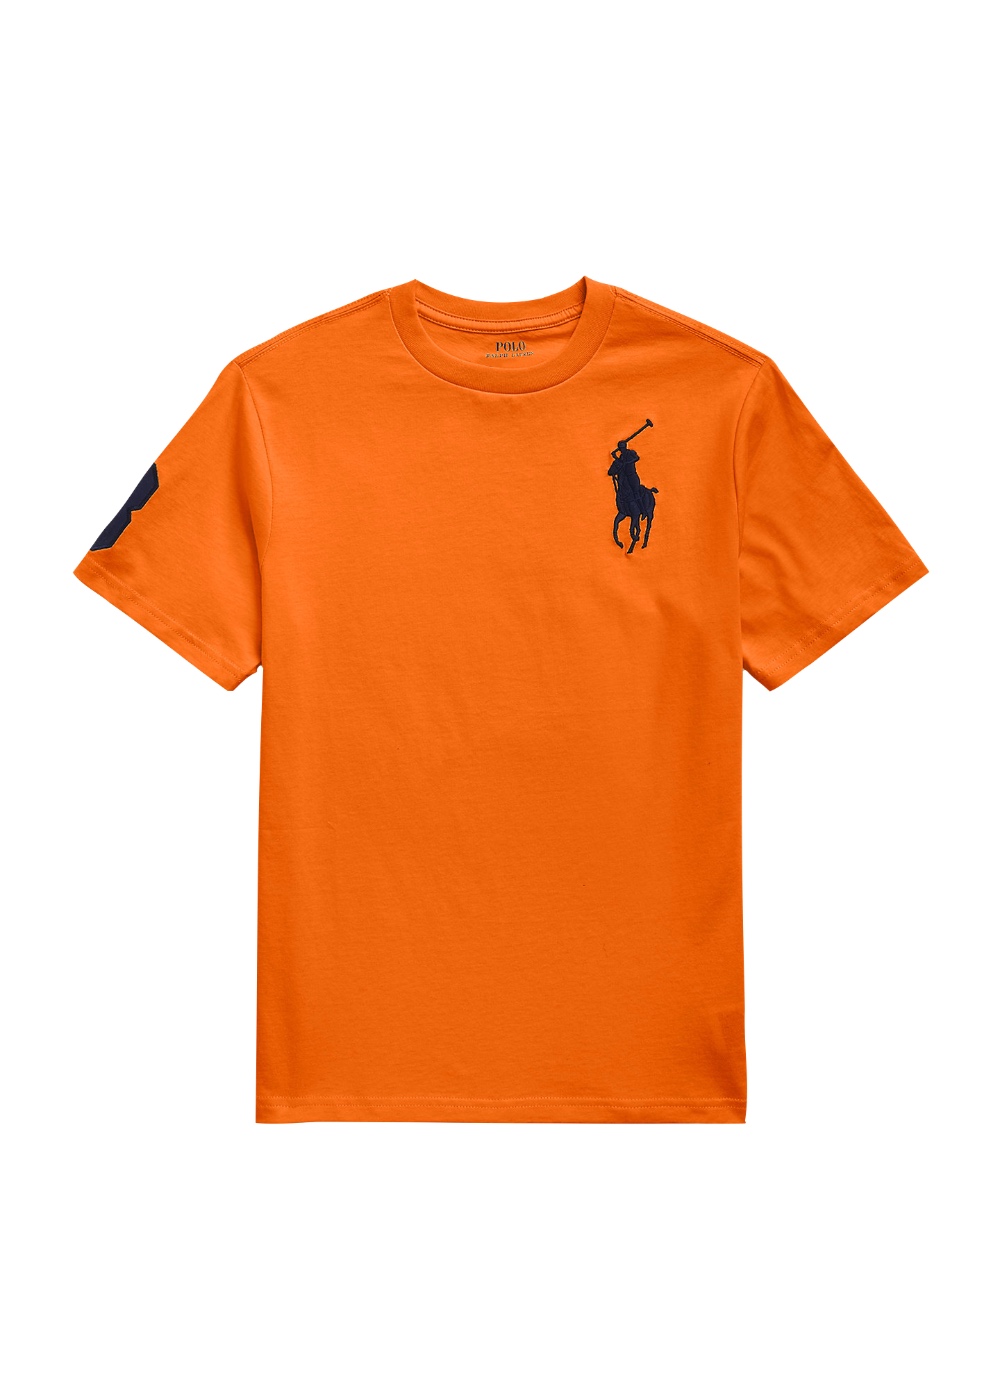 Featured image for “Polo Ralph Lauren T-shirt big pony”